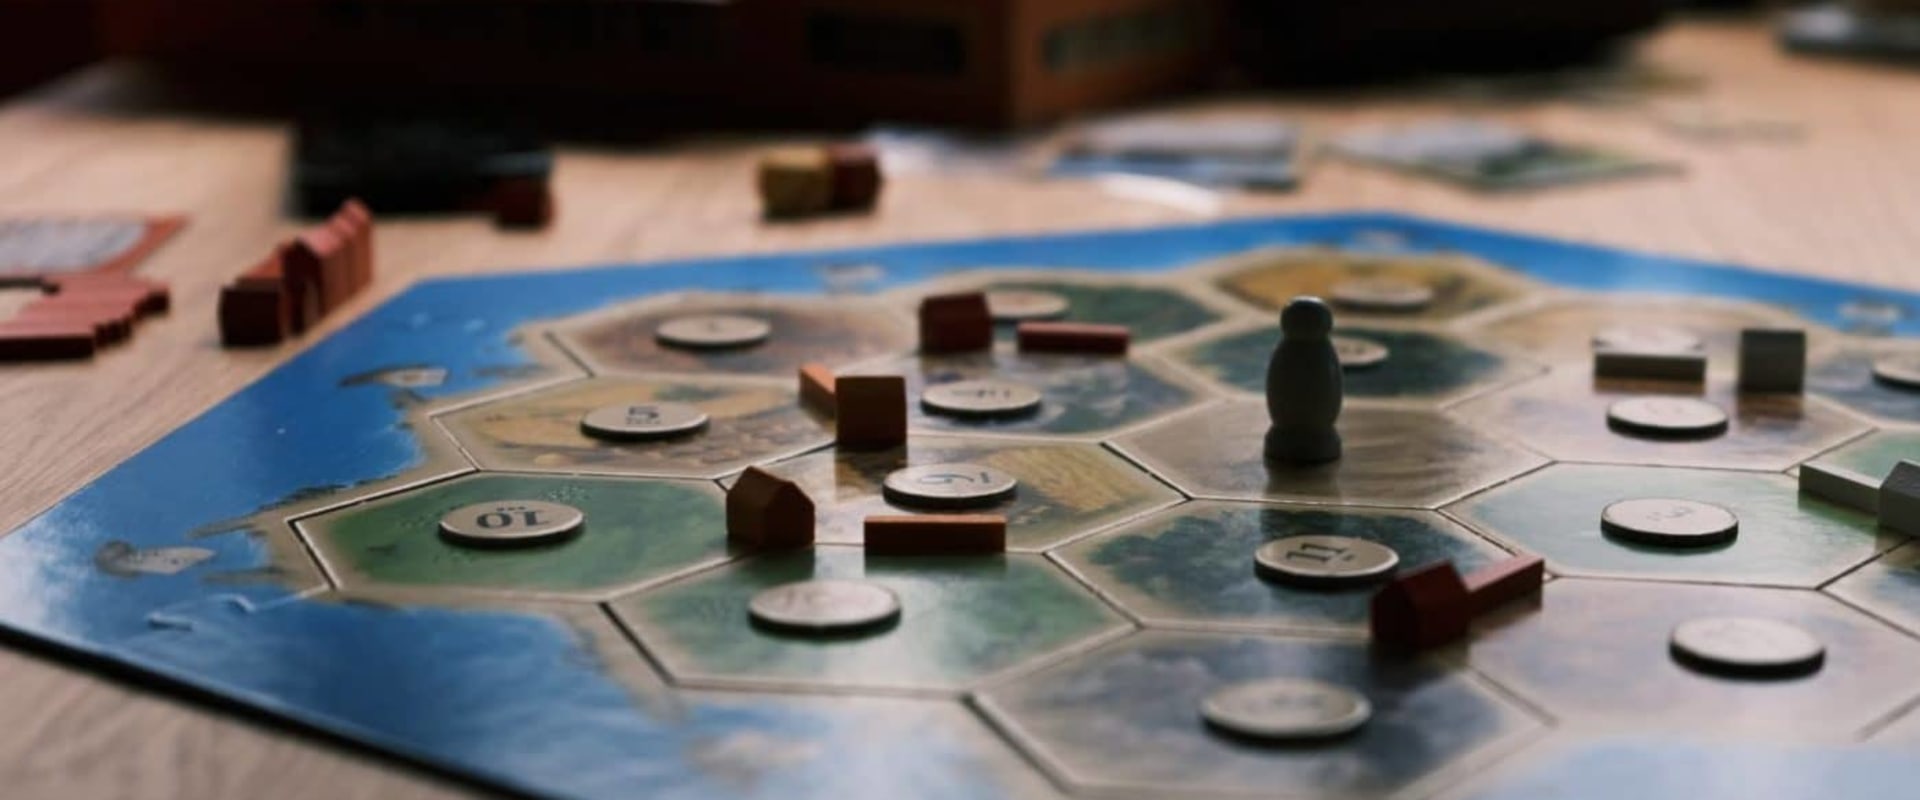 Exploring Catan - A Comprehensive Look at the Popular Strategy Board Game